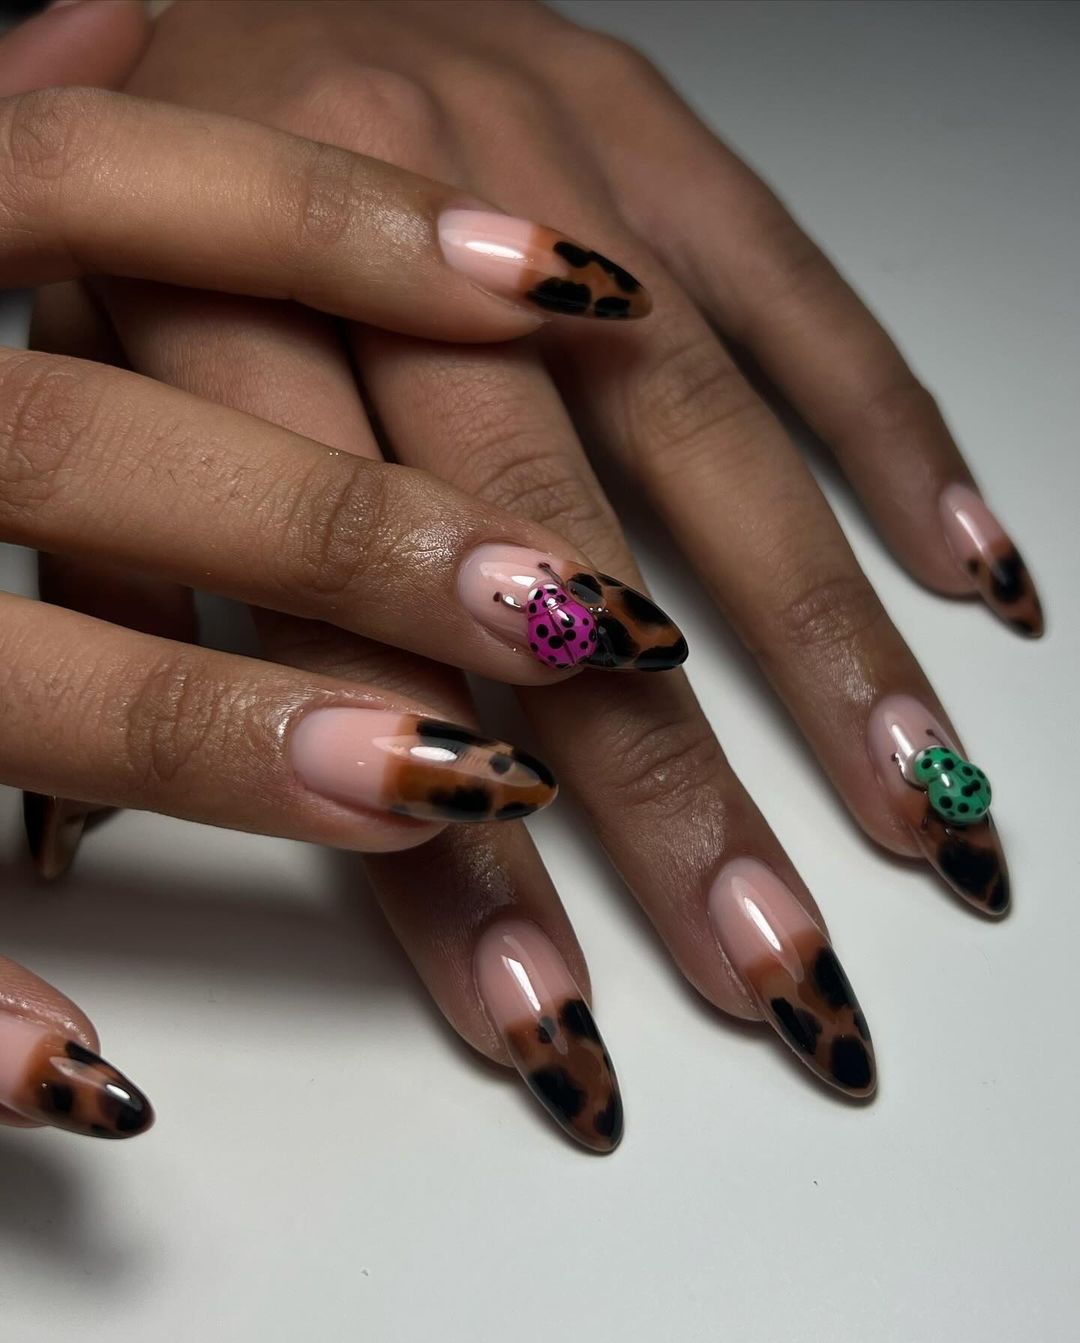 31 Summer Nail Art Ideas: Elevate Your Manicure Game with Creative Designs